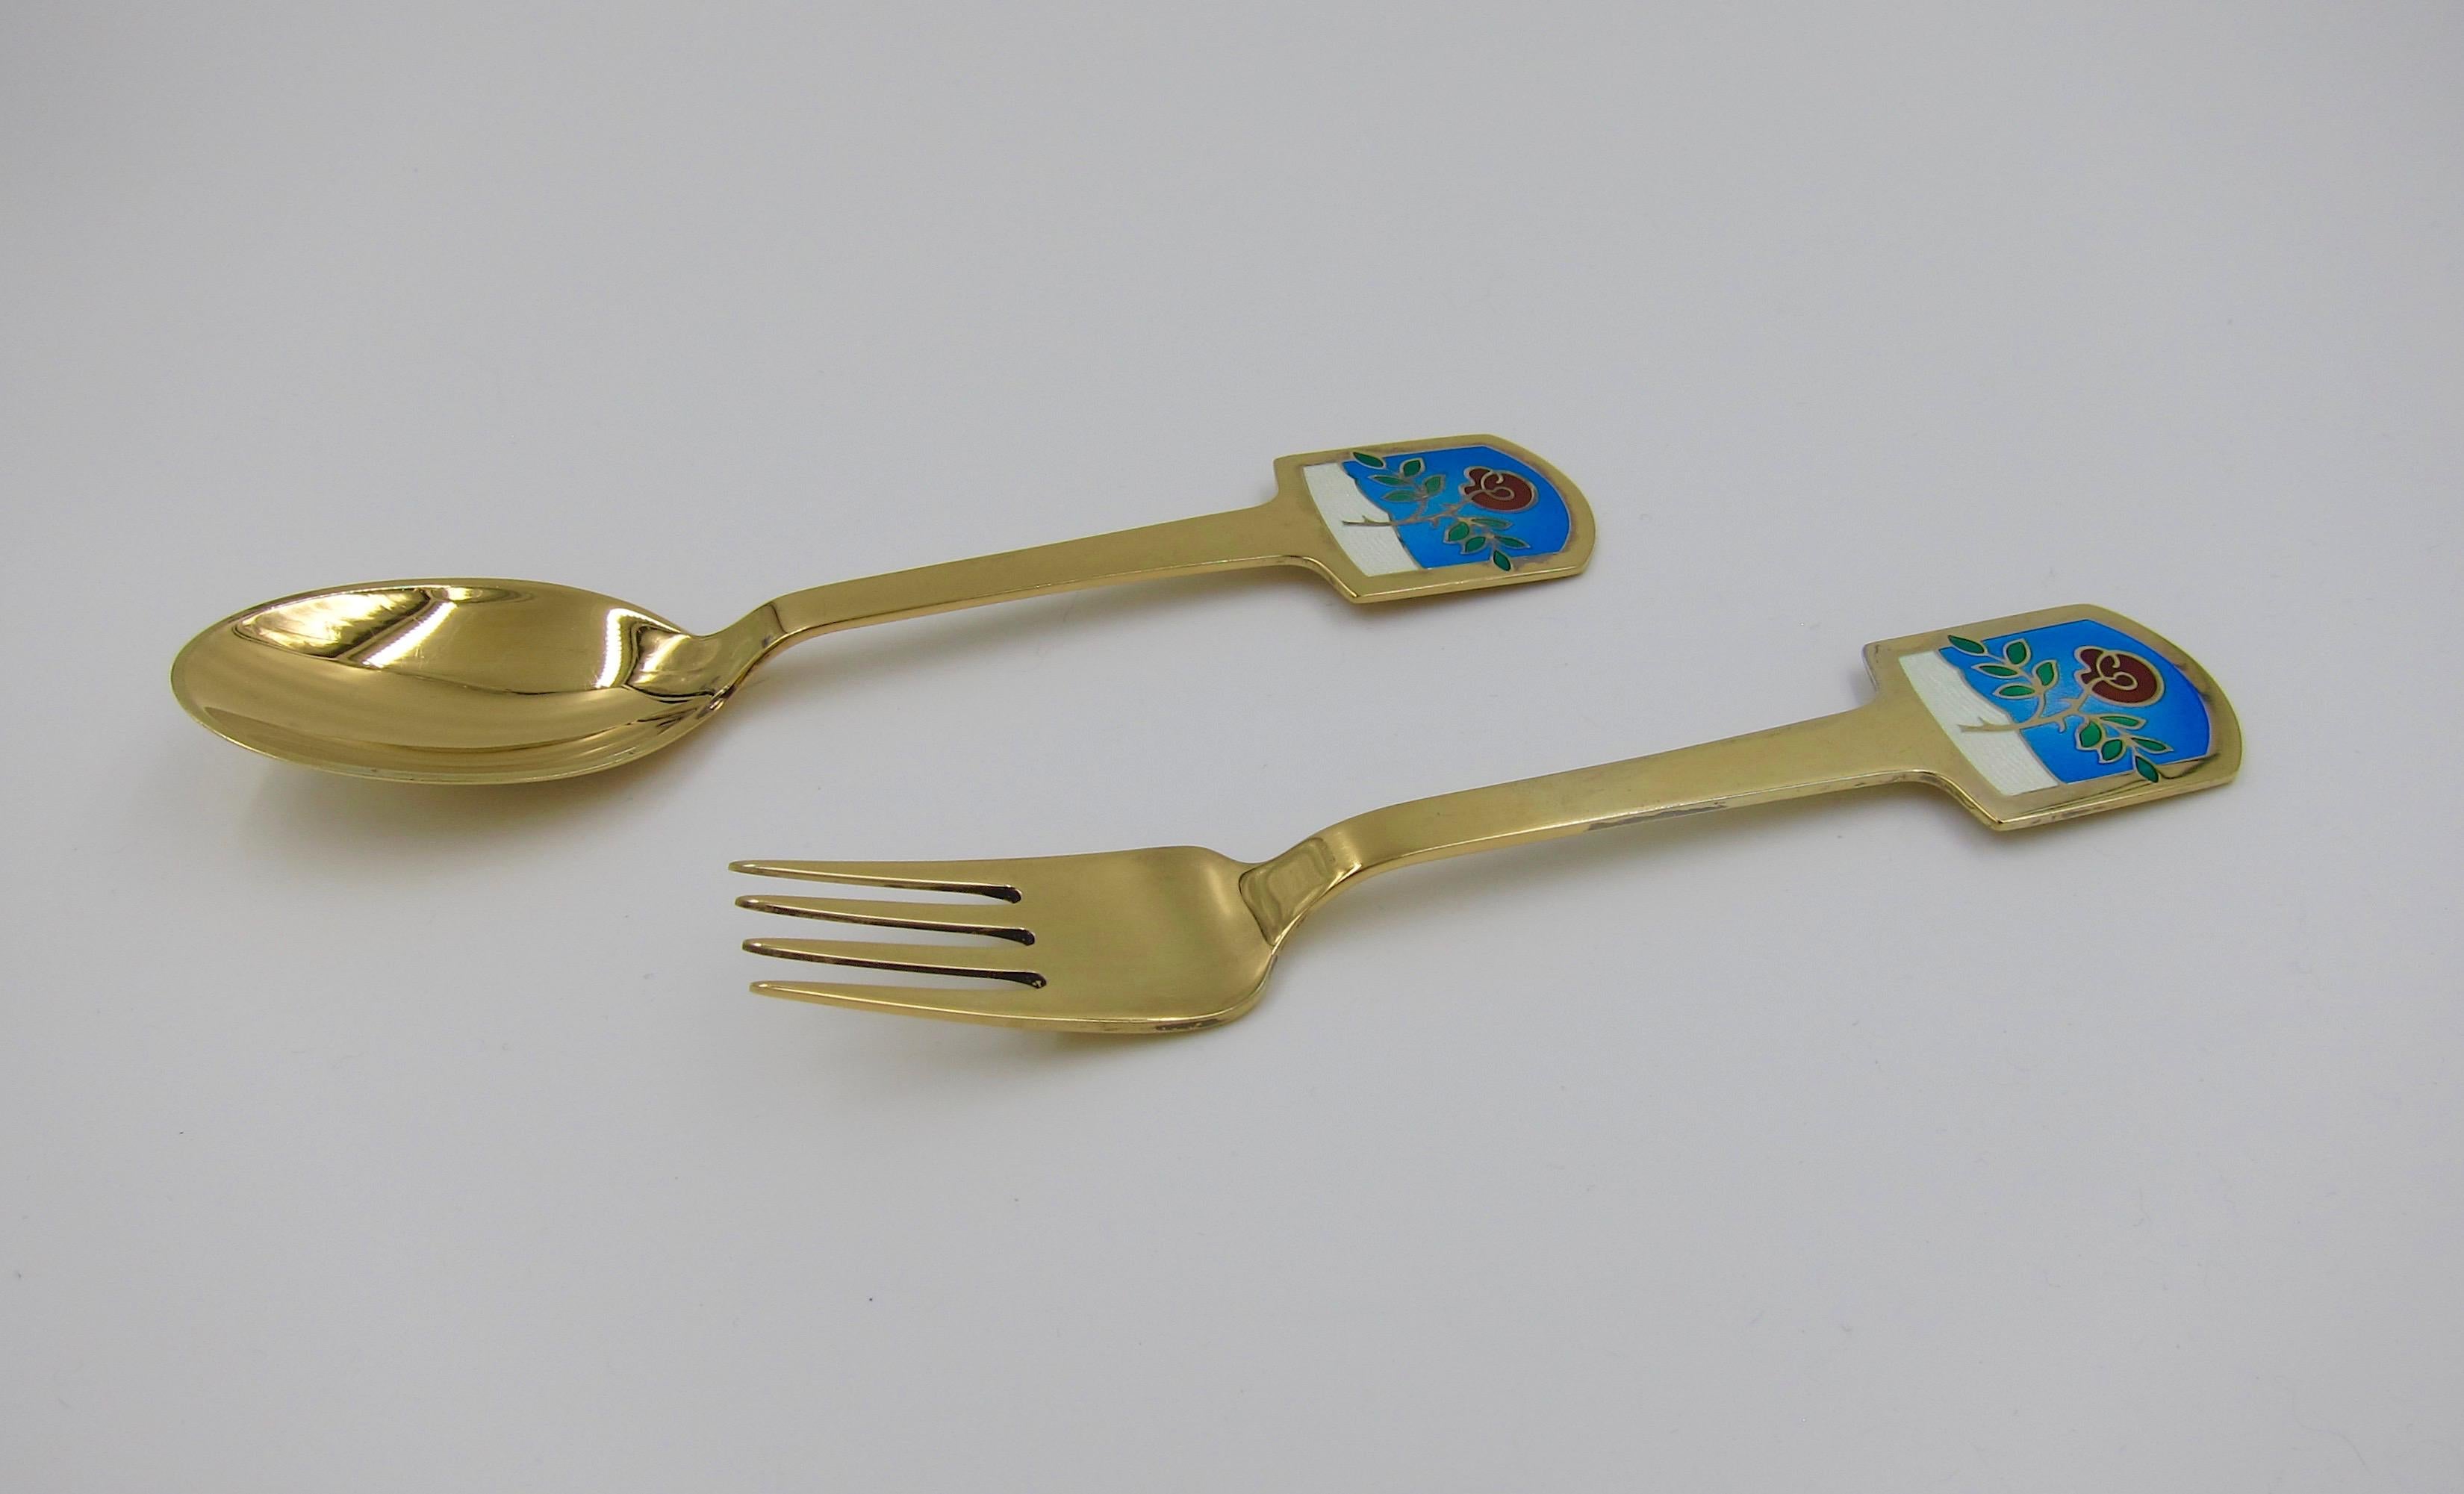 1977 Anton Michelsen Gilt Silver and Enamel Christmas Fork and Spoon Set For Sale 1